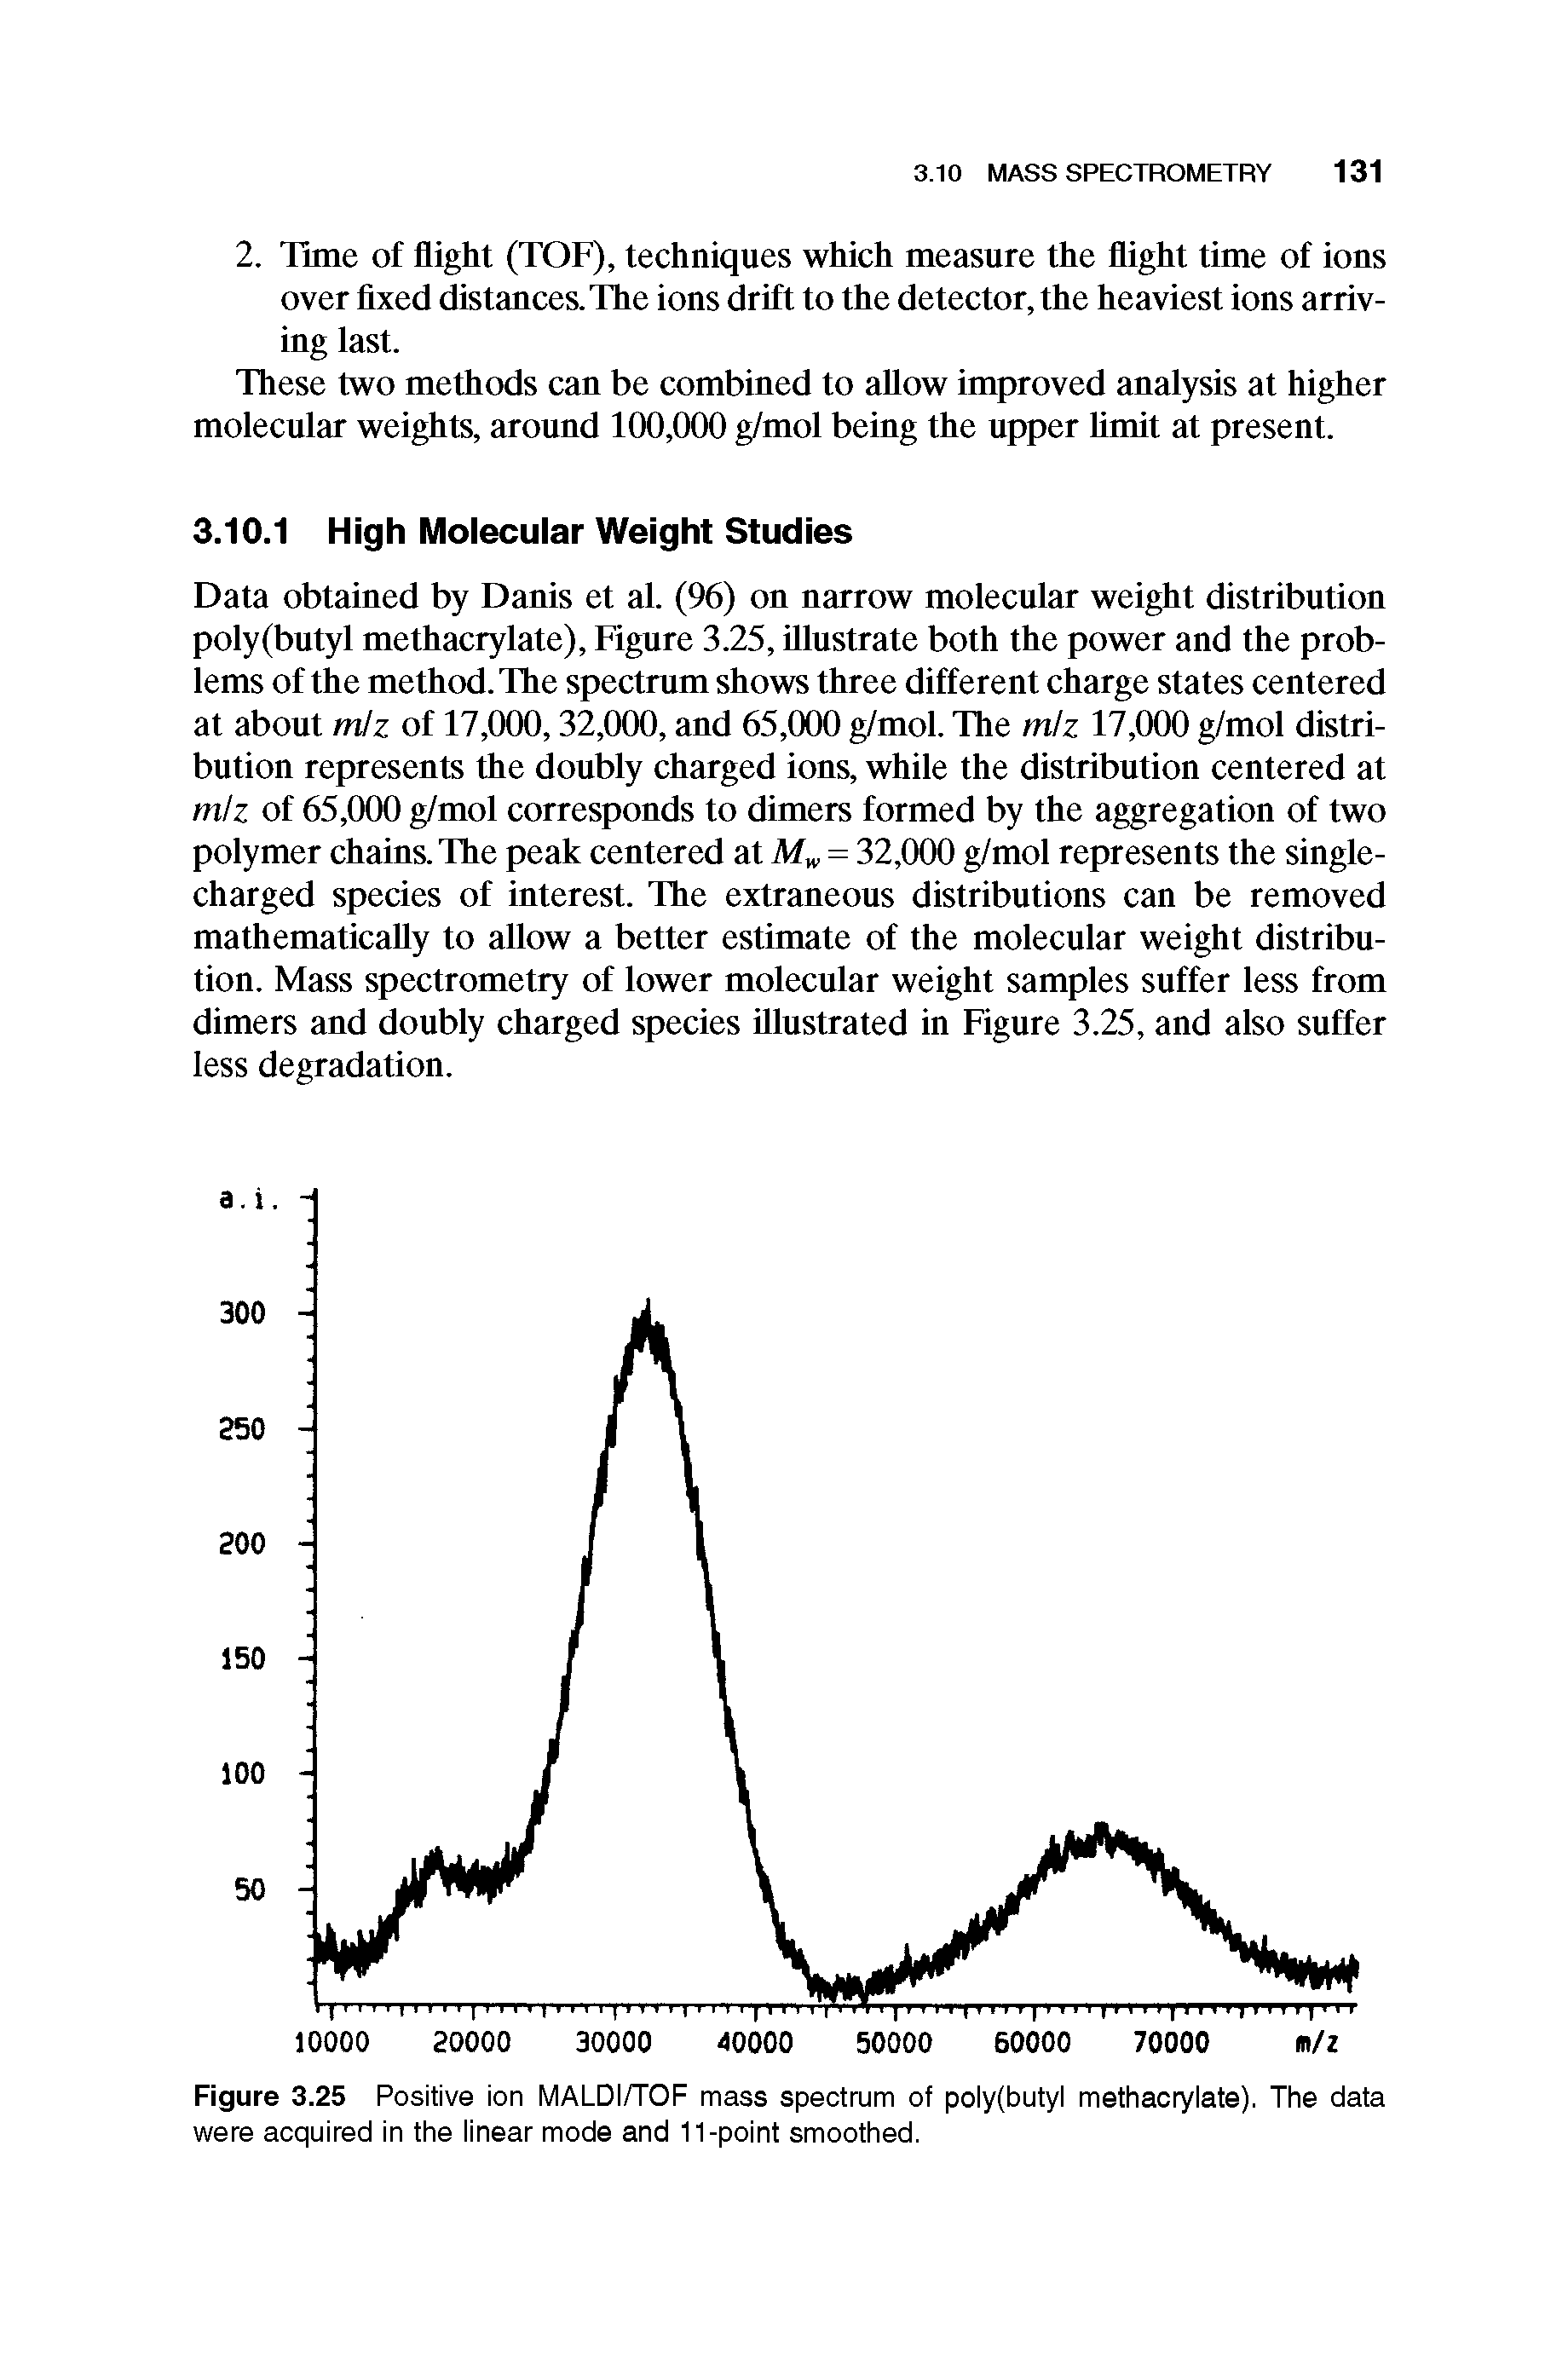 Figure 3.25 Positive ion MALDi/TOF mass spectrum of poiy(butyi methacryiate). The data were acquired in the iinear mode and 11-point smoothed.